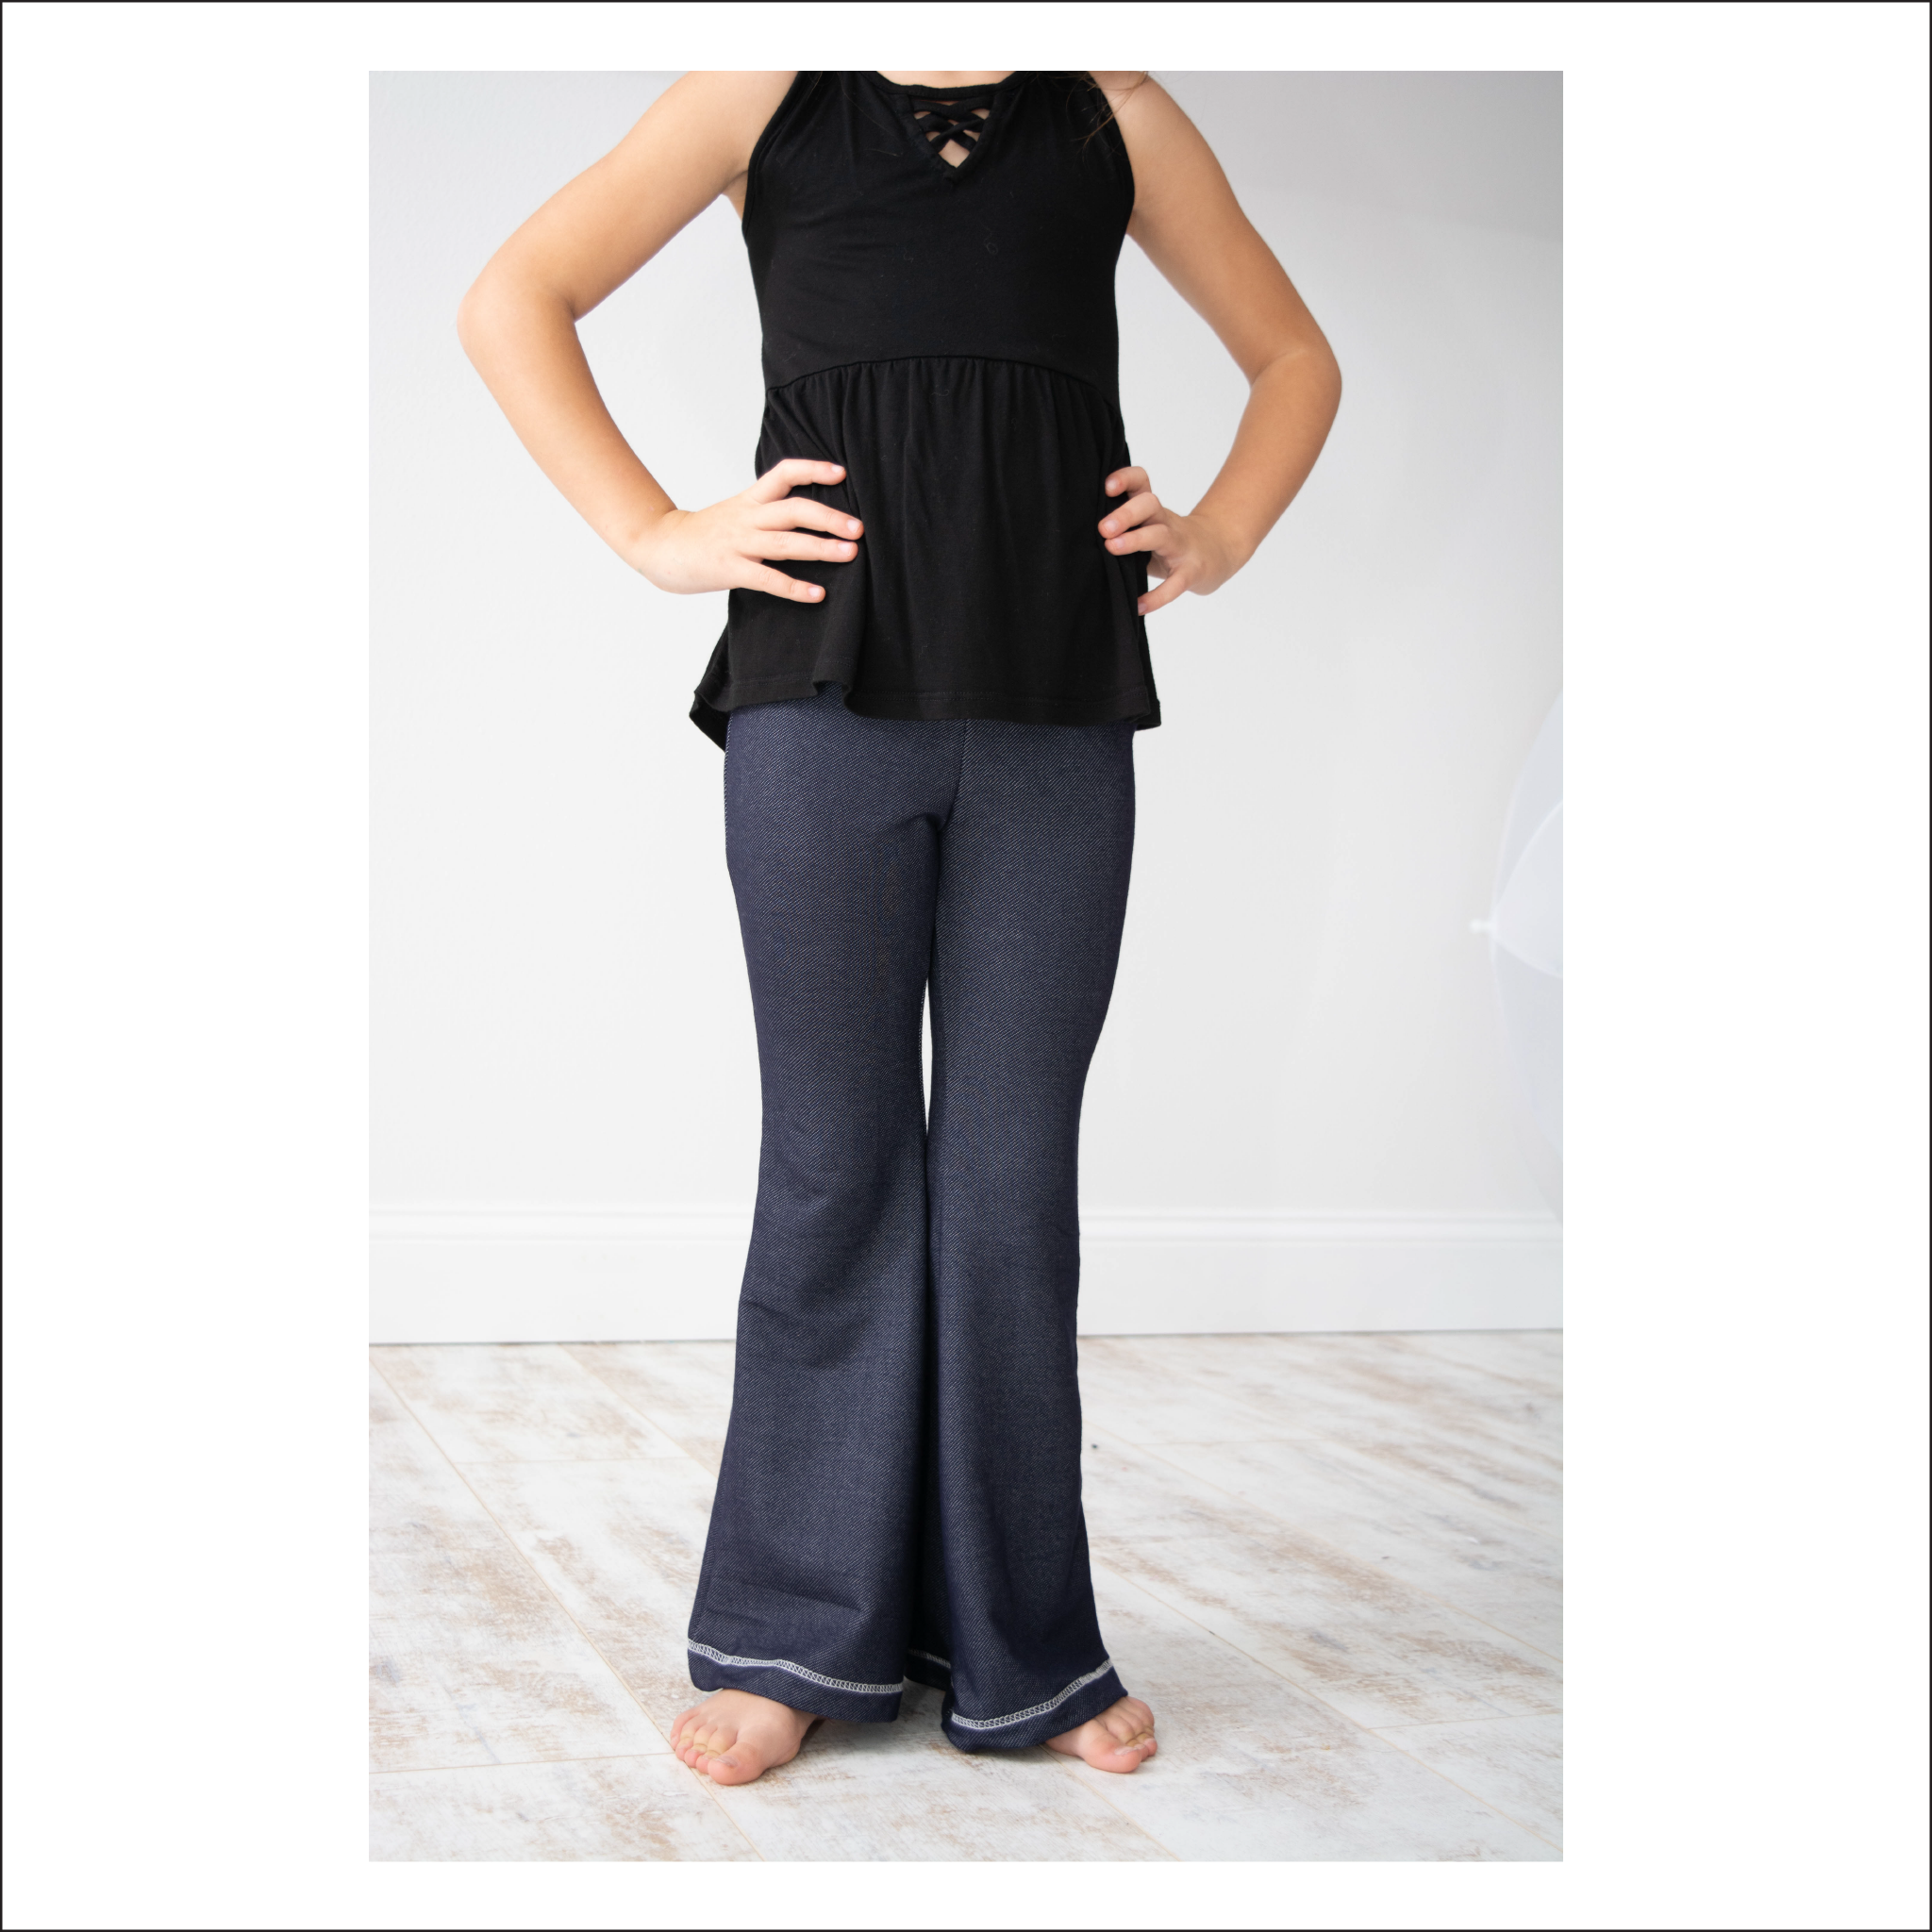 High Waist Flare Pants PDF Sewing Pattern for Jersey Yoga or